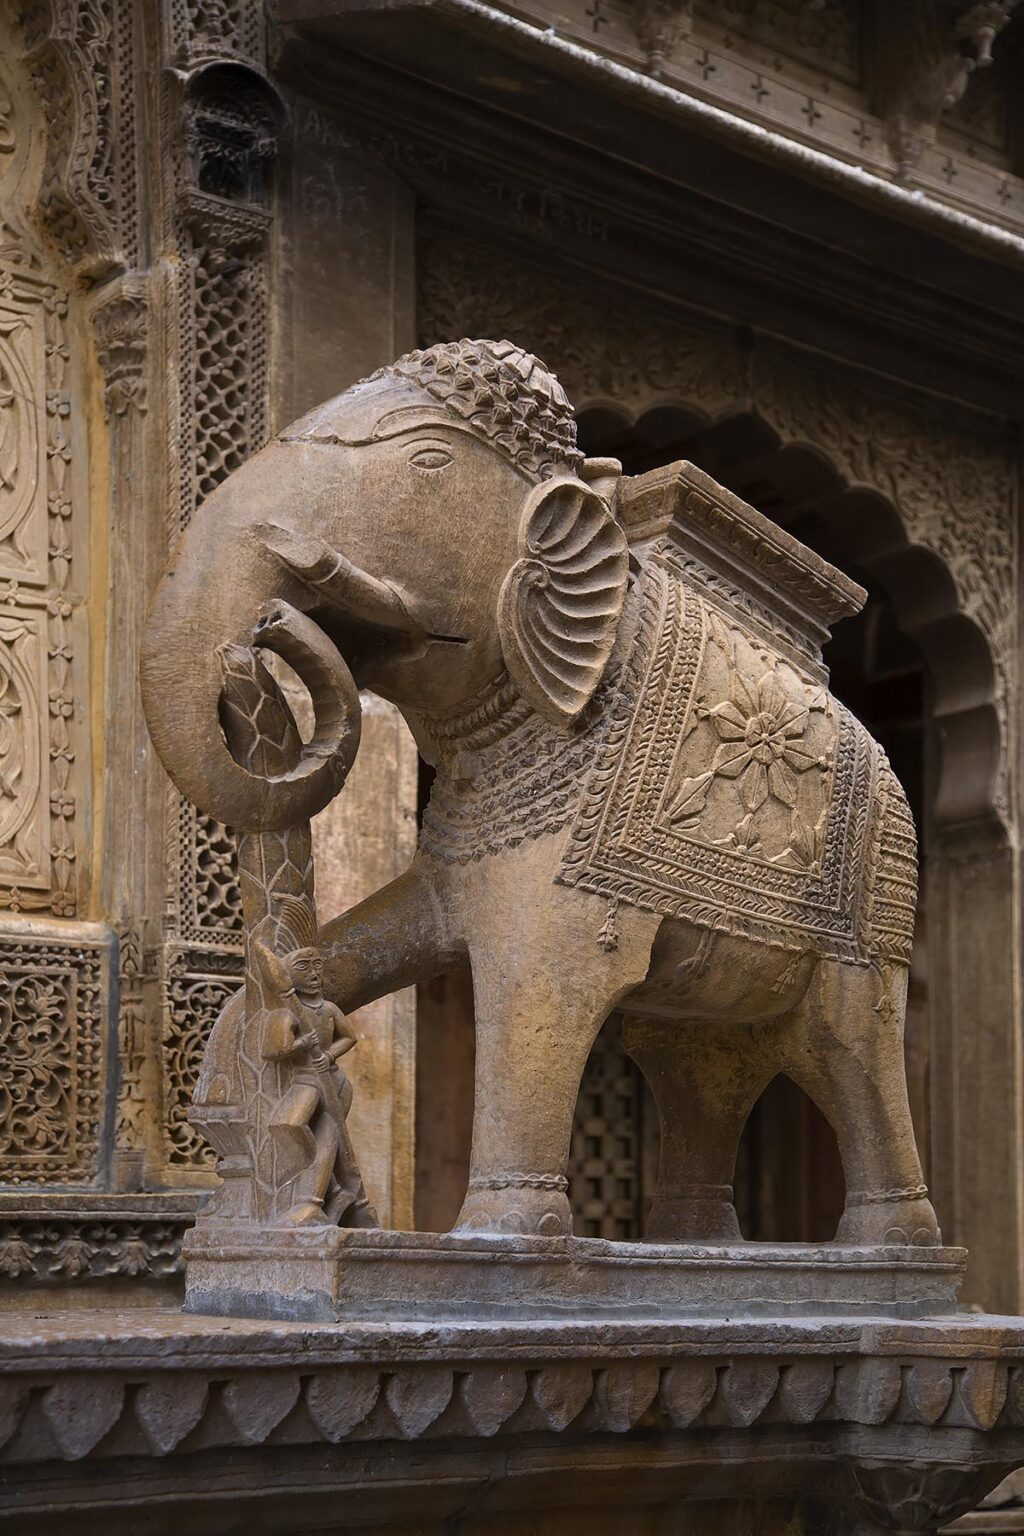 A hand carved SANDSTONE ELEPHANT decorates the exterior of the Mayors beautiful HAVELI or home in JAISALMER - RAJASTHAN, INDIA